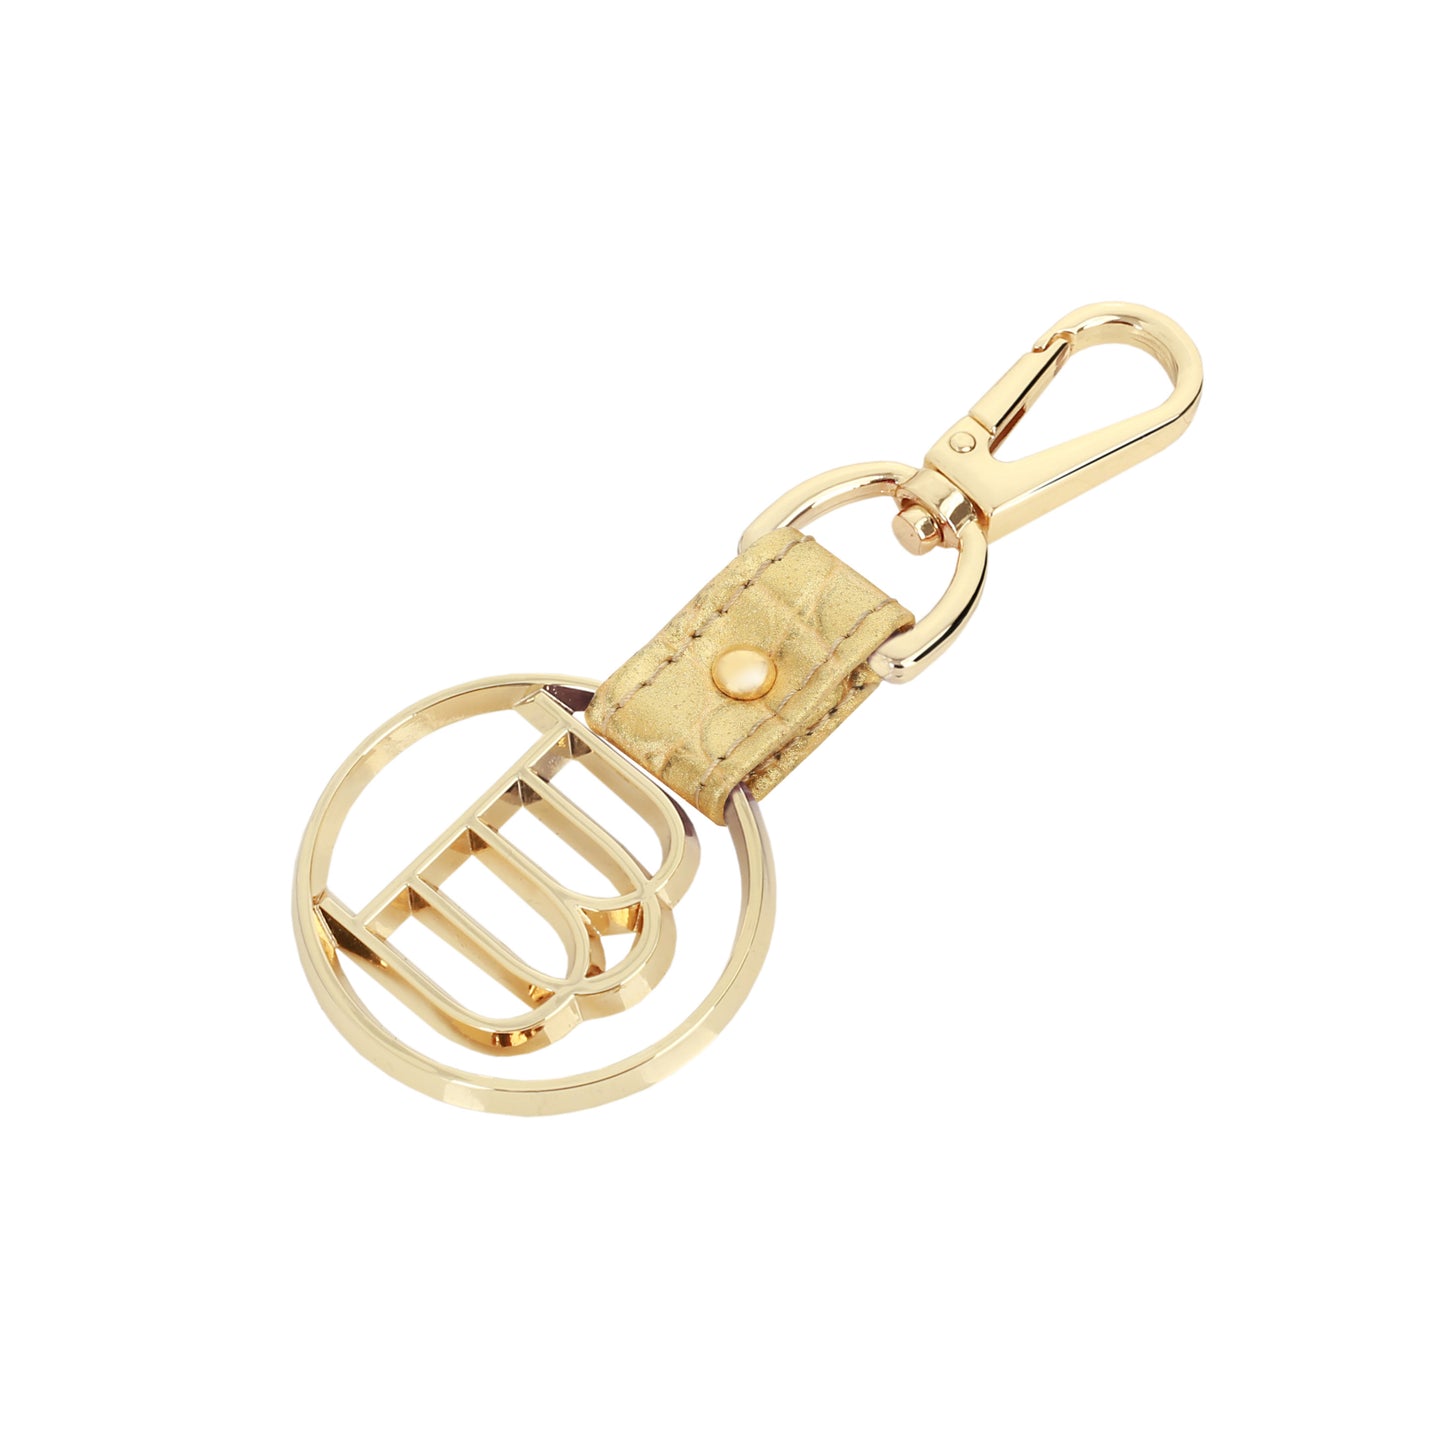 Leather keyring with the GOLD logo